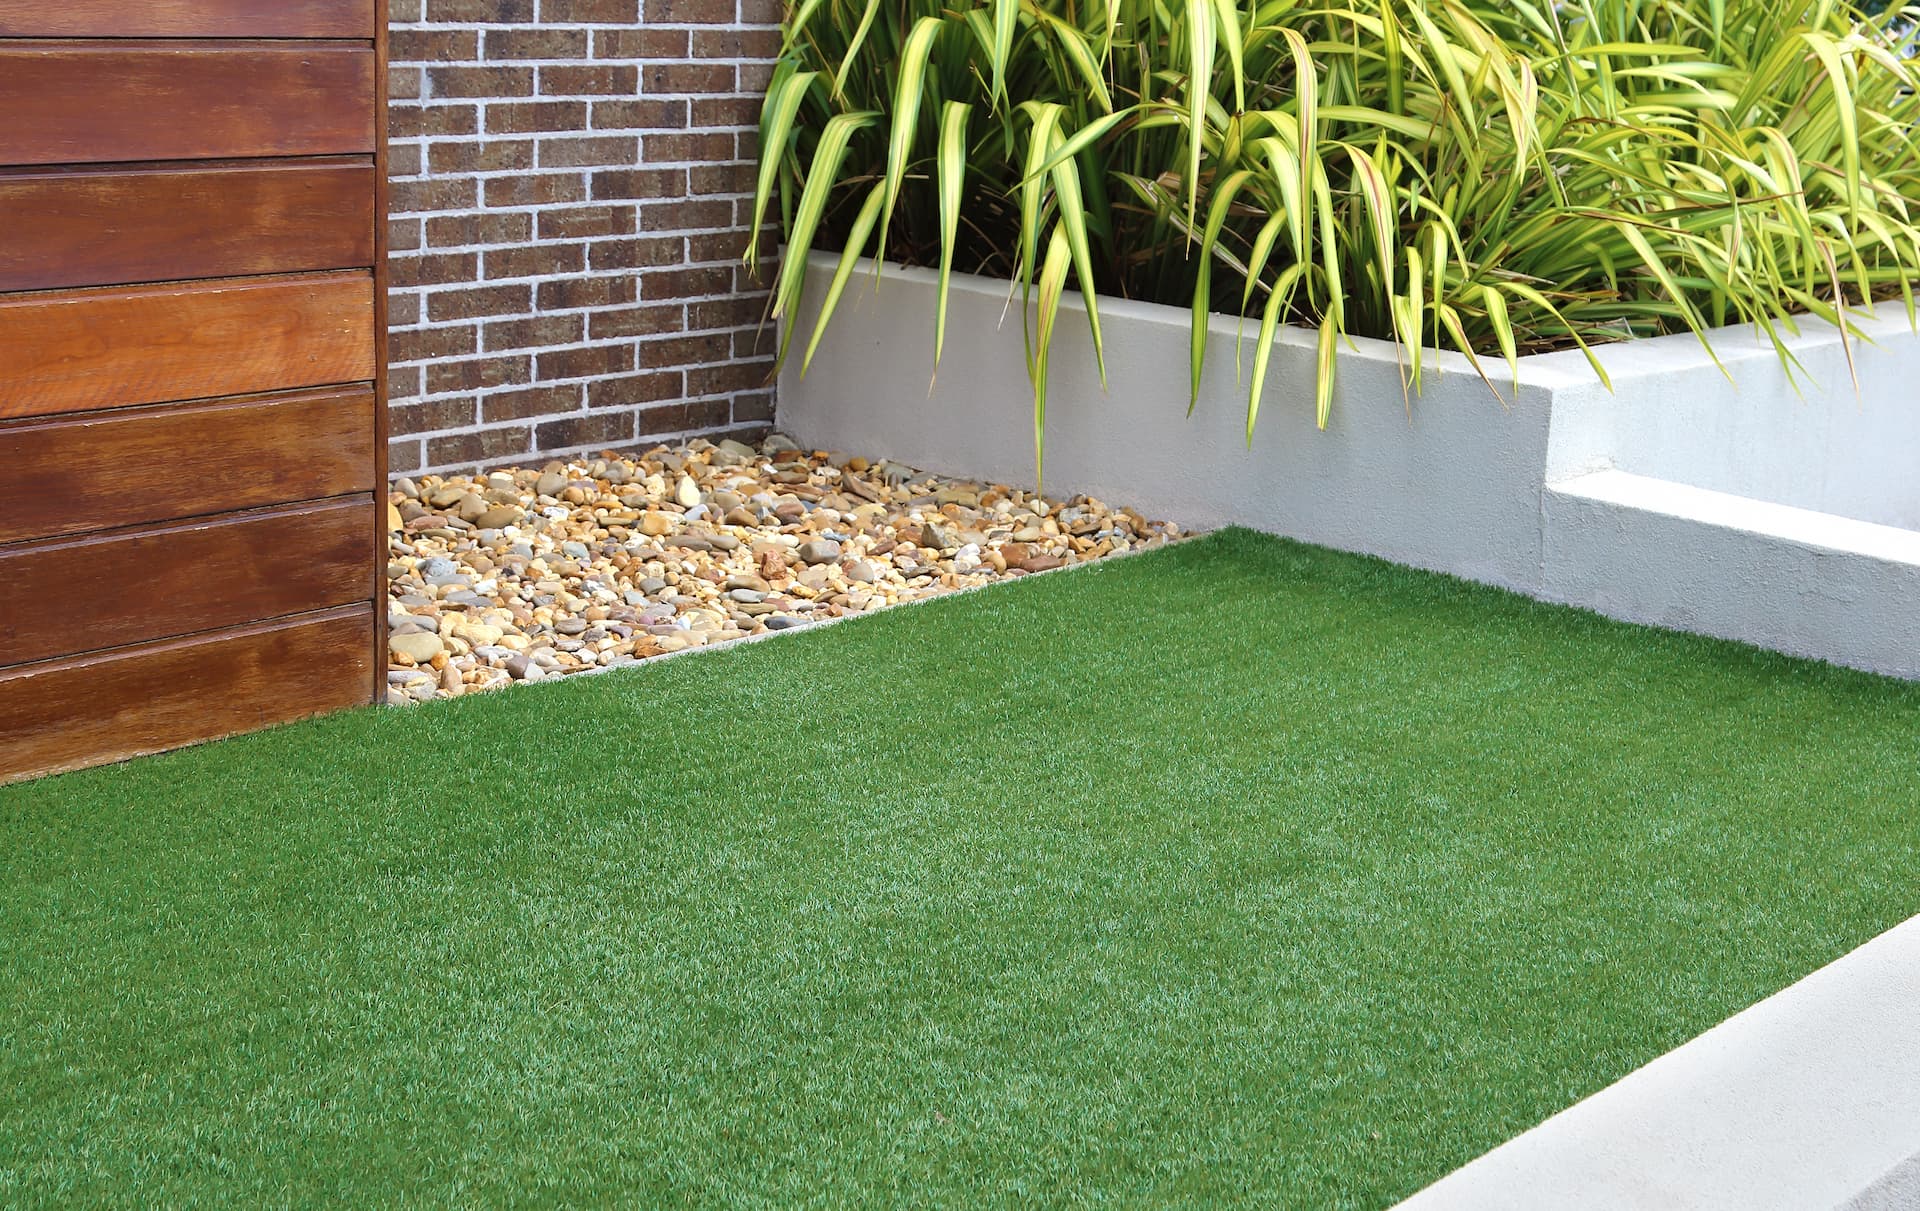 Licenced Artificial Grass & Turf services in Stockport